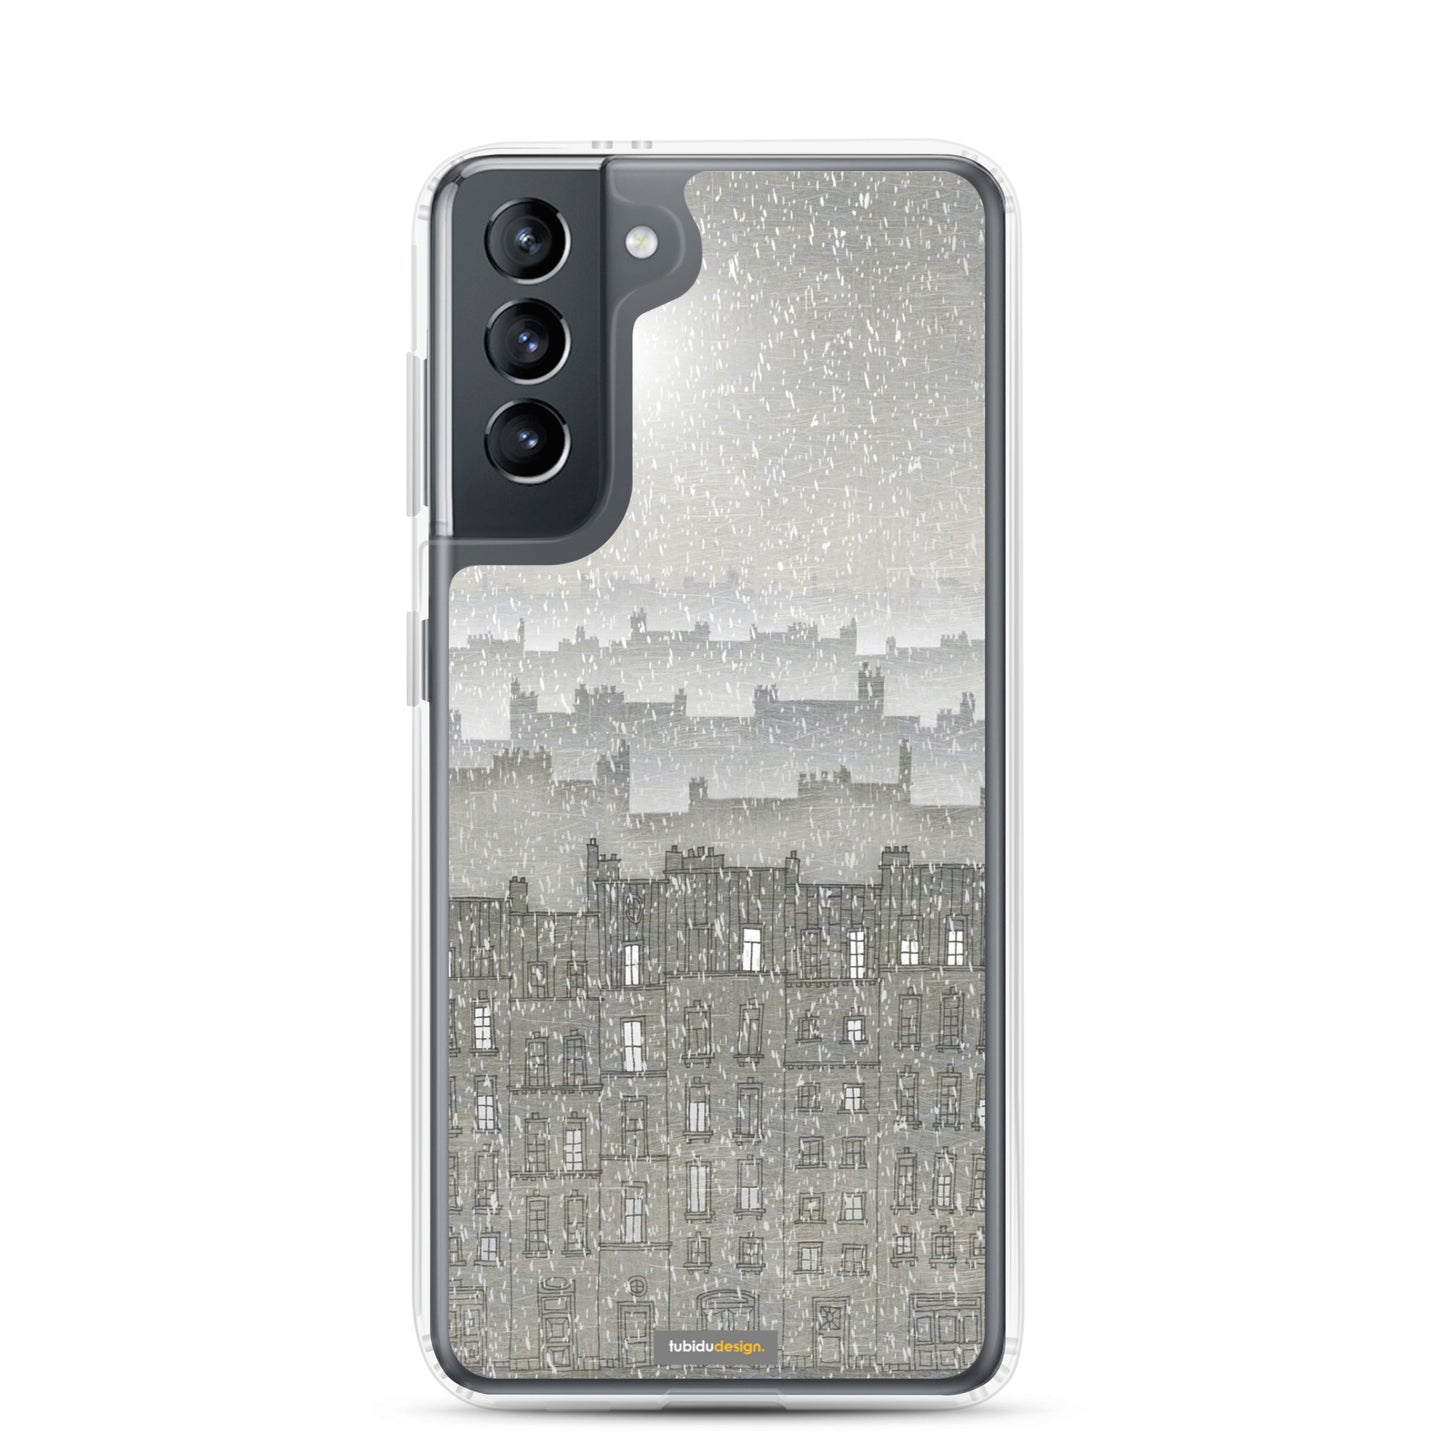 Walking with Angels - Illustrated Samsung Phone Case